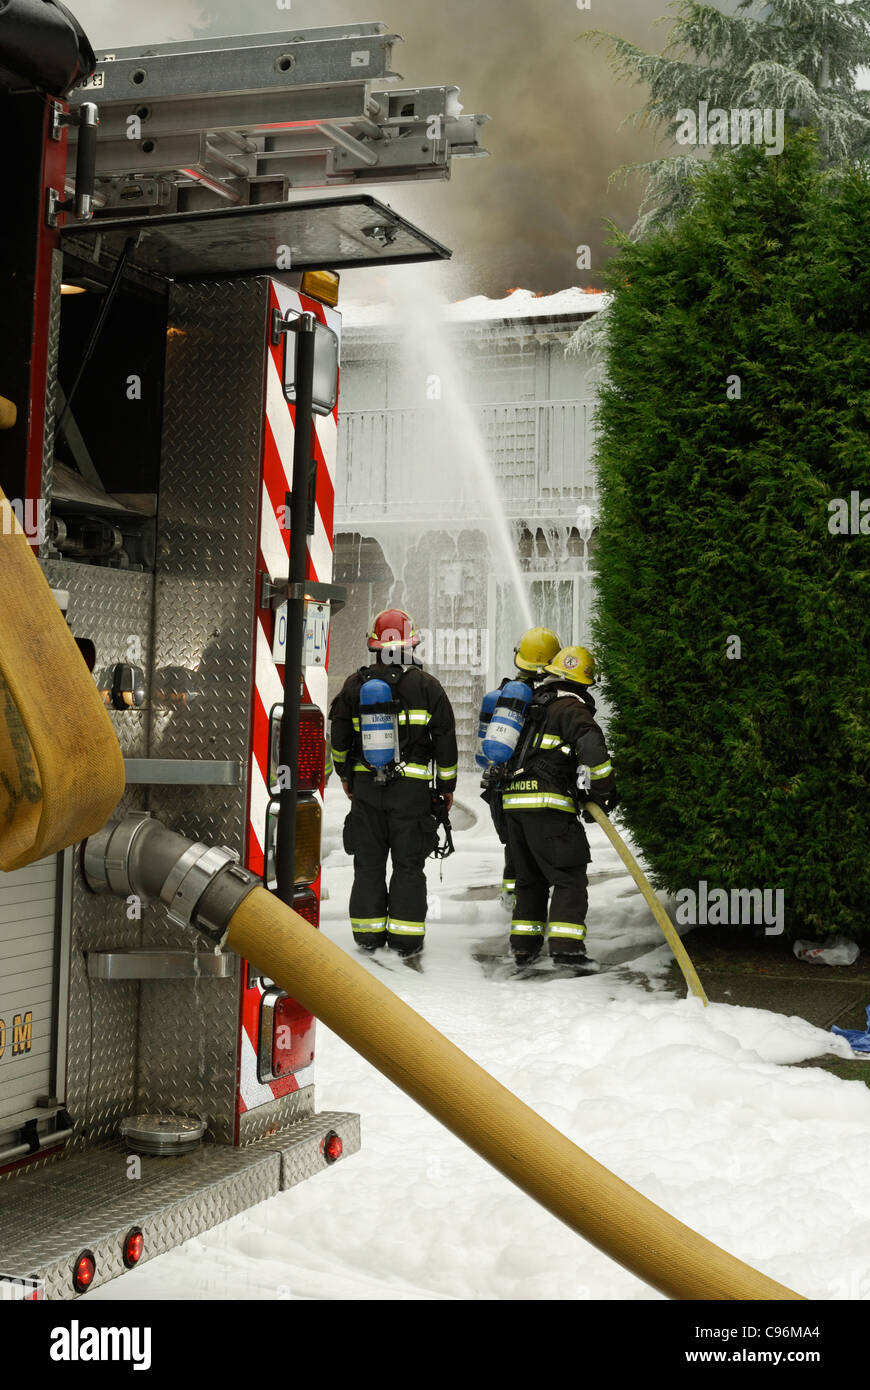 Vancouver firefighters using compressed air foam system to put out a house fire. Stock Photo